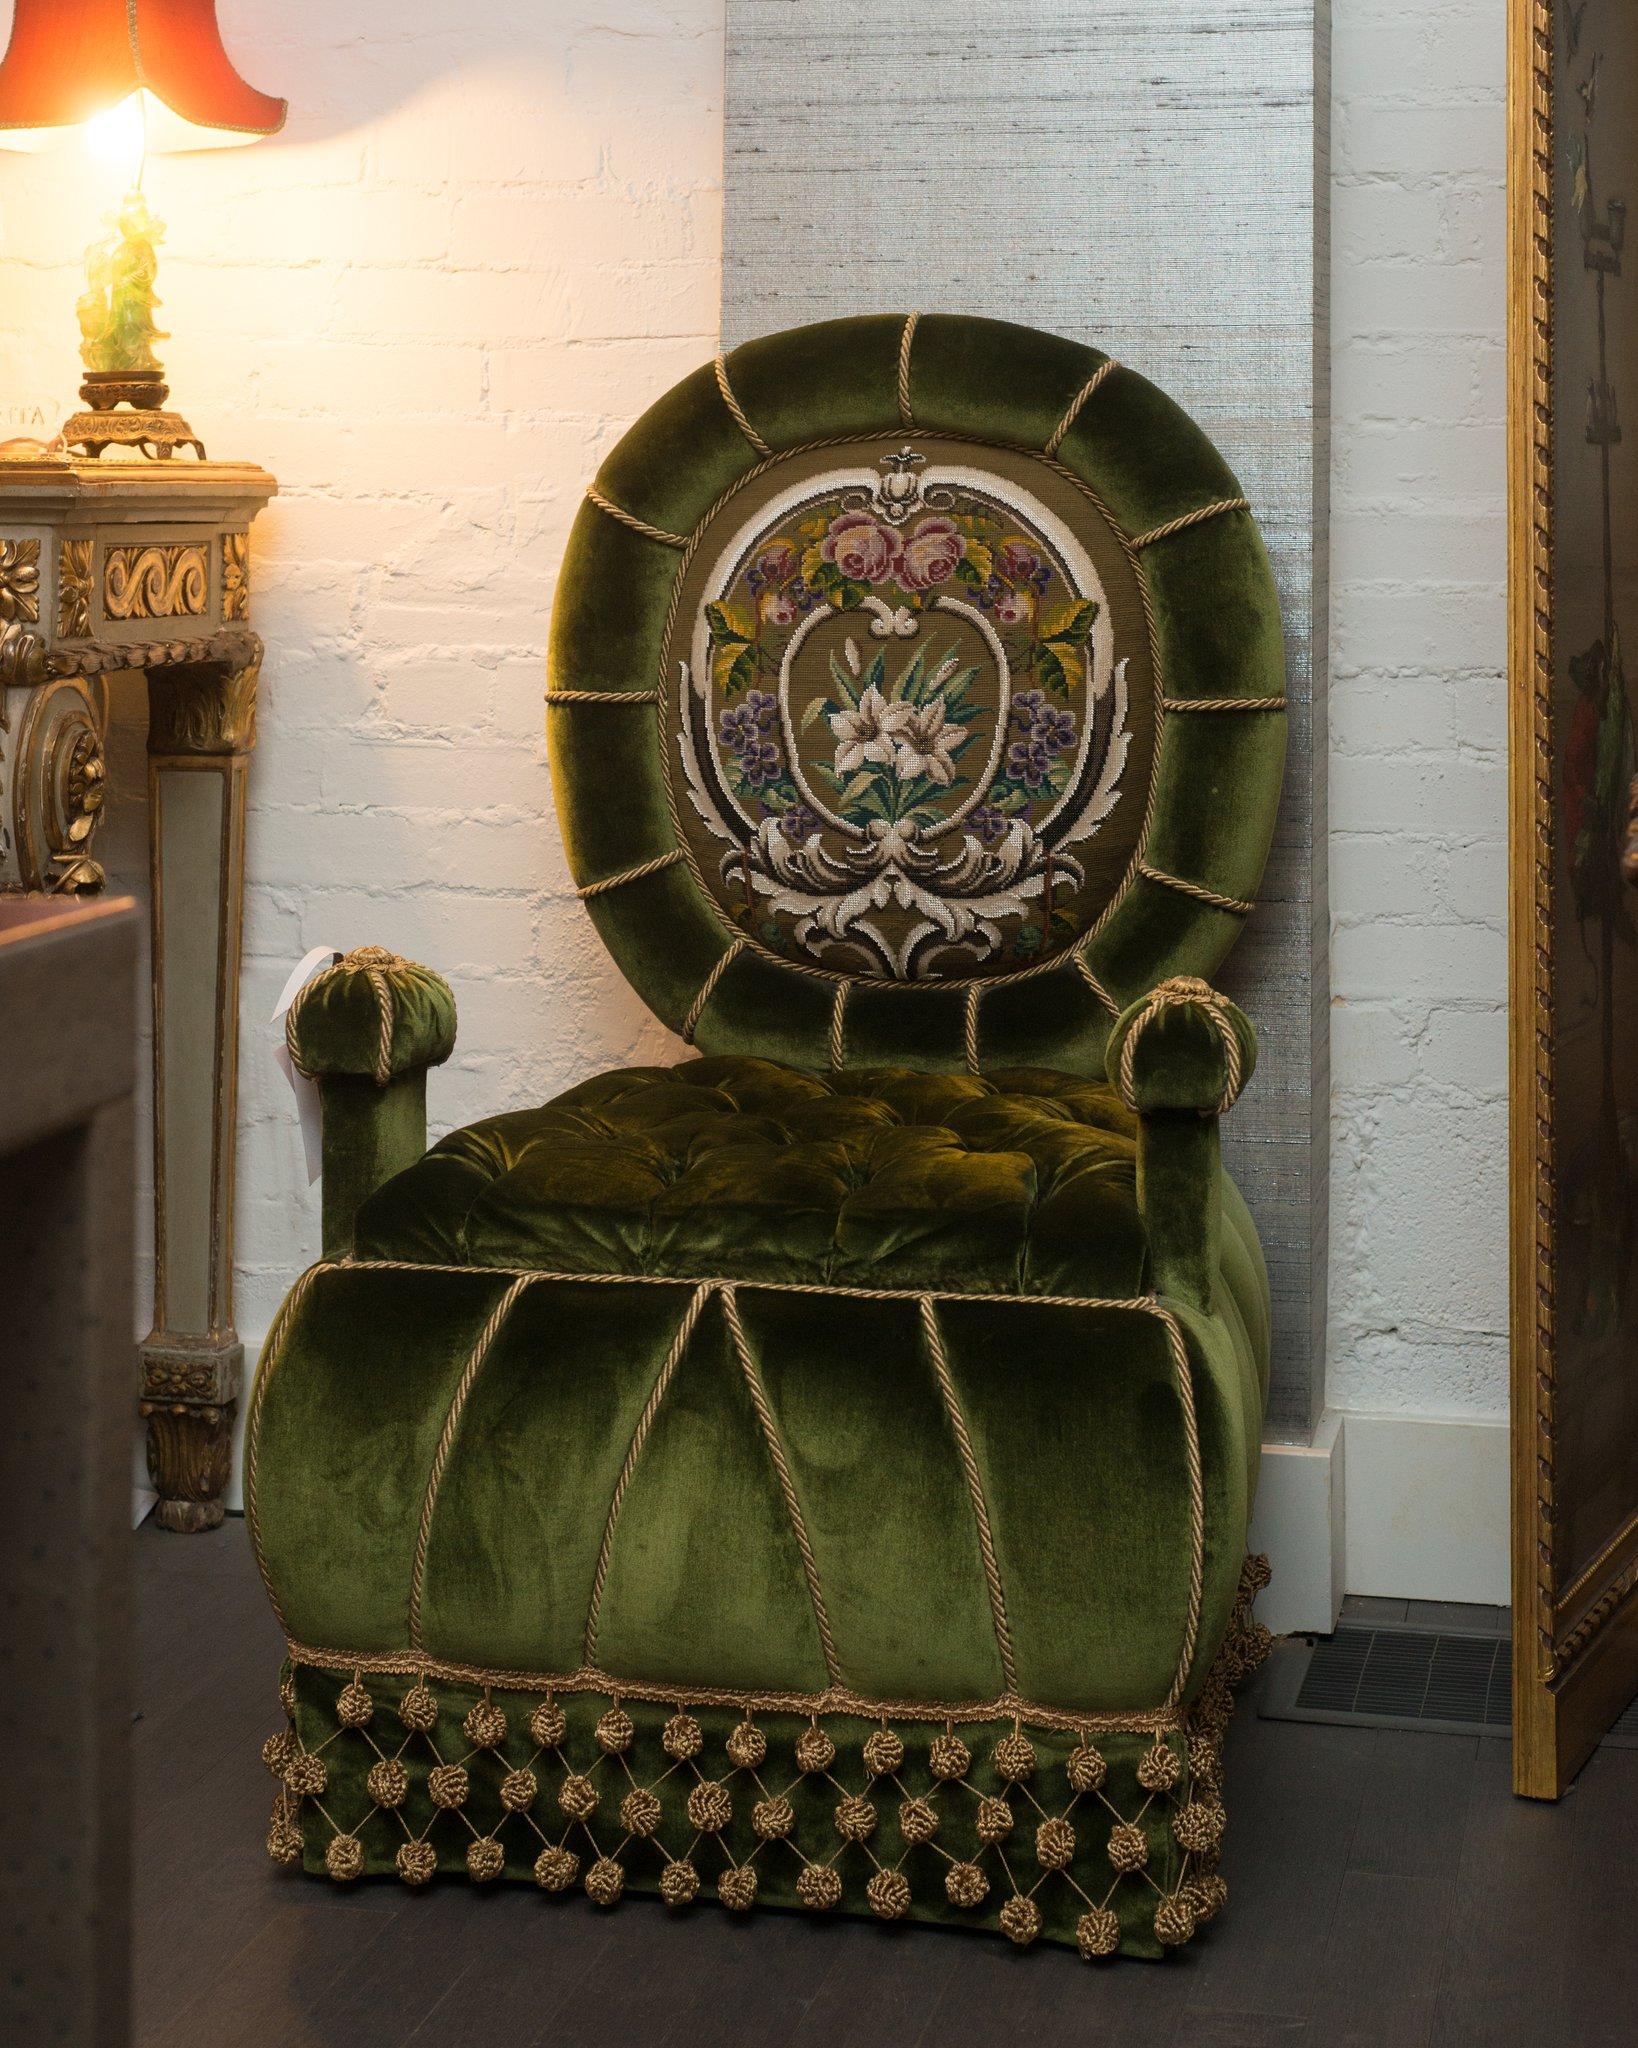 Be the Monarch of your home with this stunning throne from Studio Maison Nurita. This ornate chair is inspired by the Napoleon III style and a chair exhibited in the Deauville home of Yves St Laurent. The exquisite back is made with an antique panel